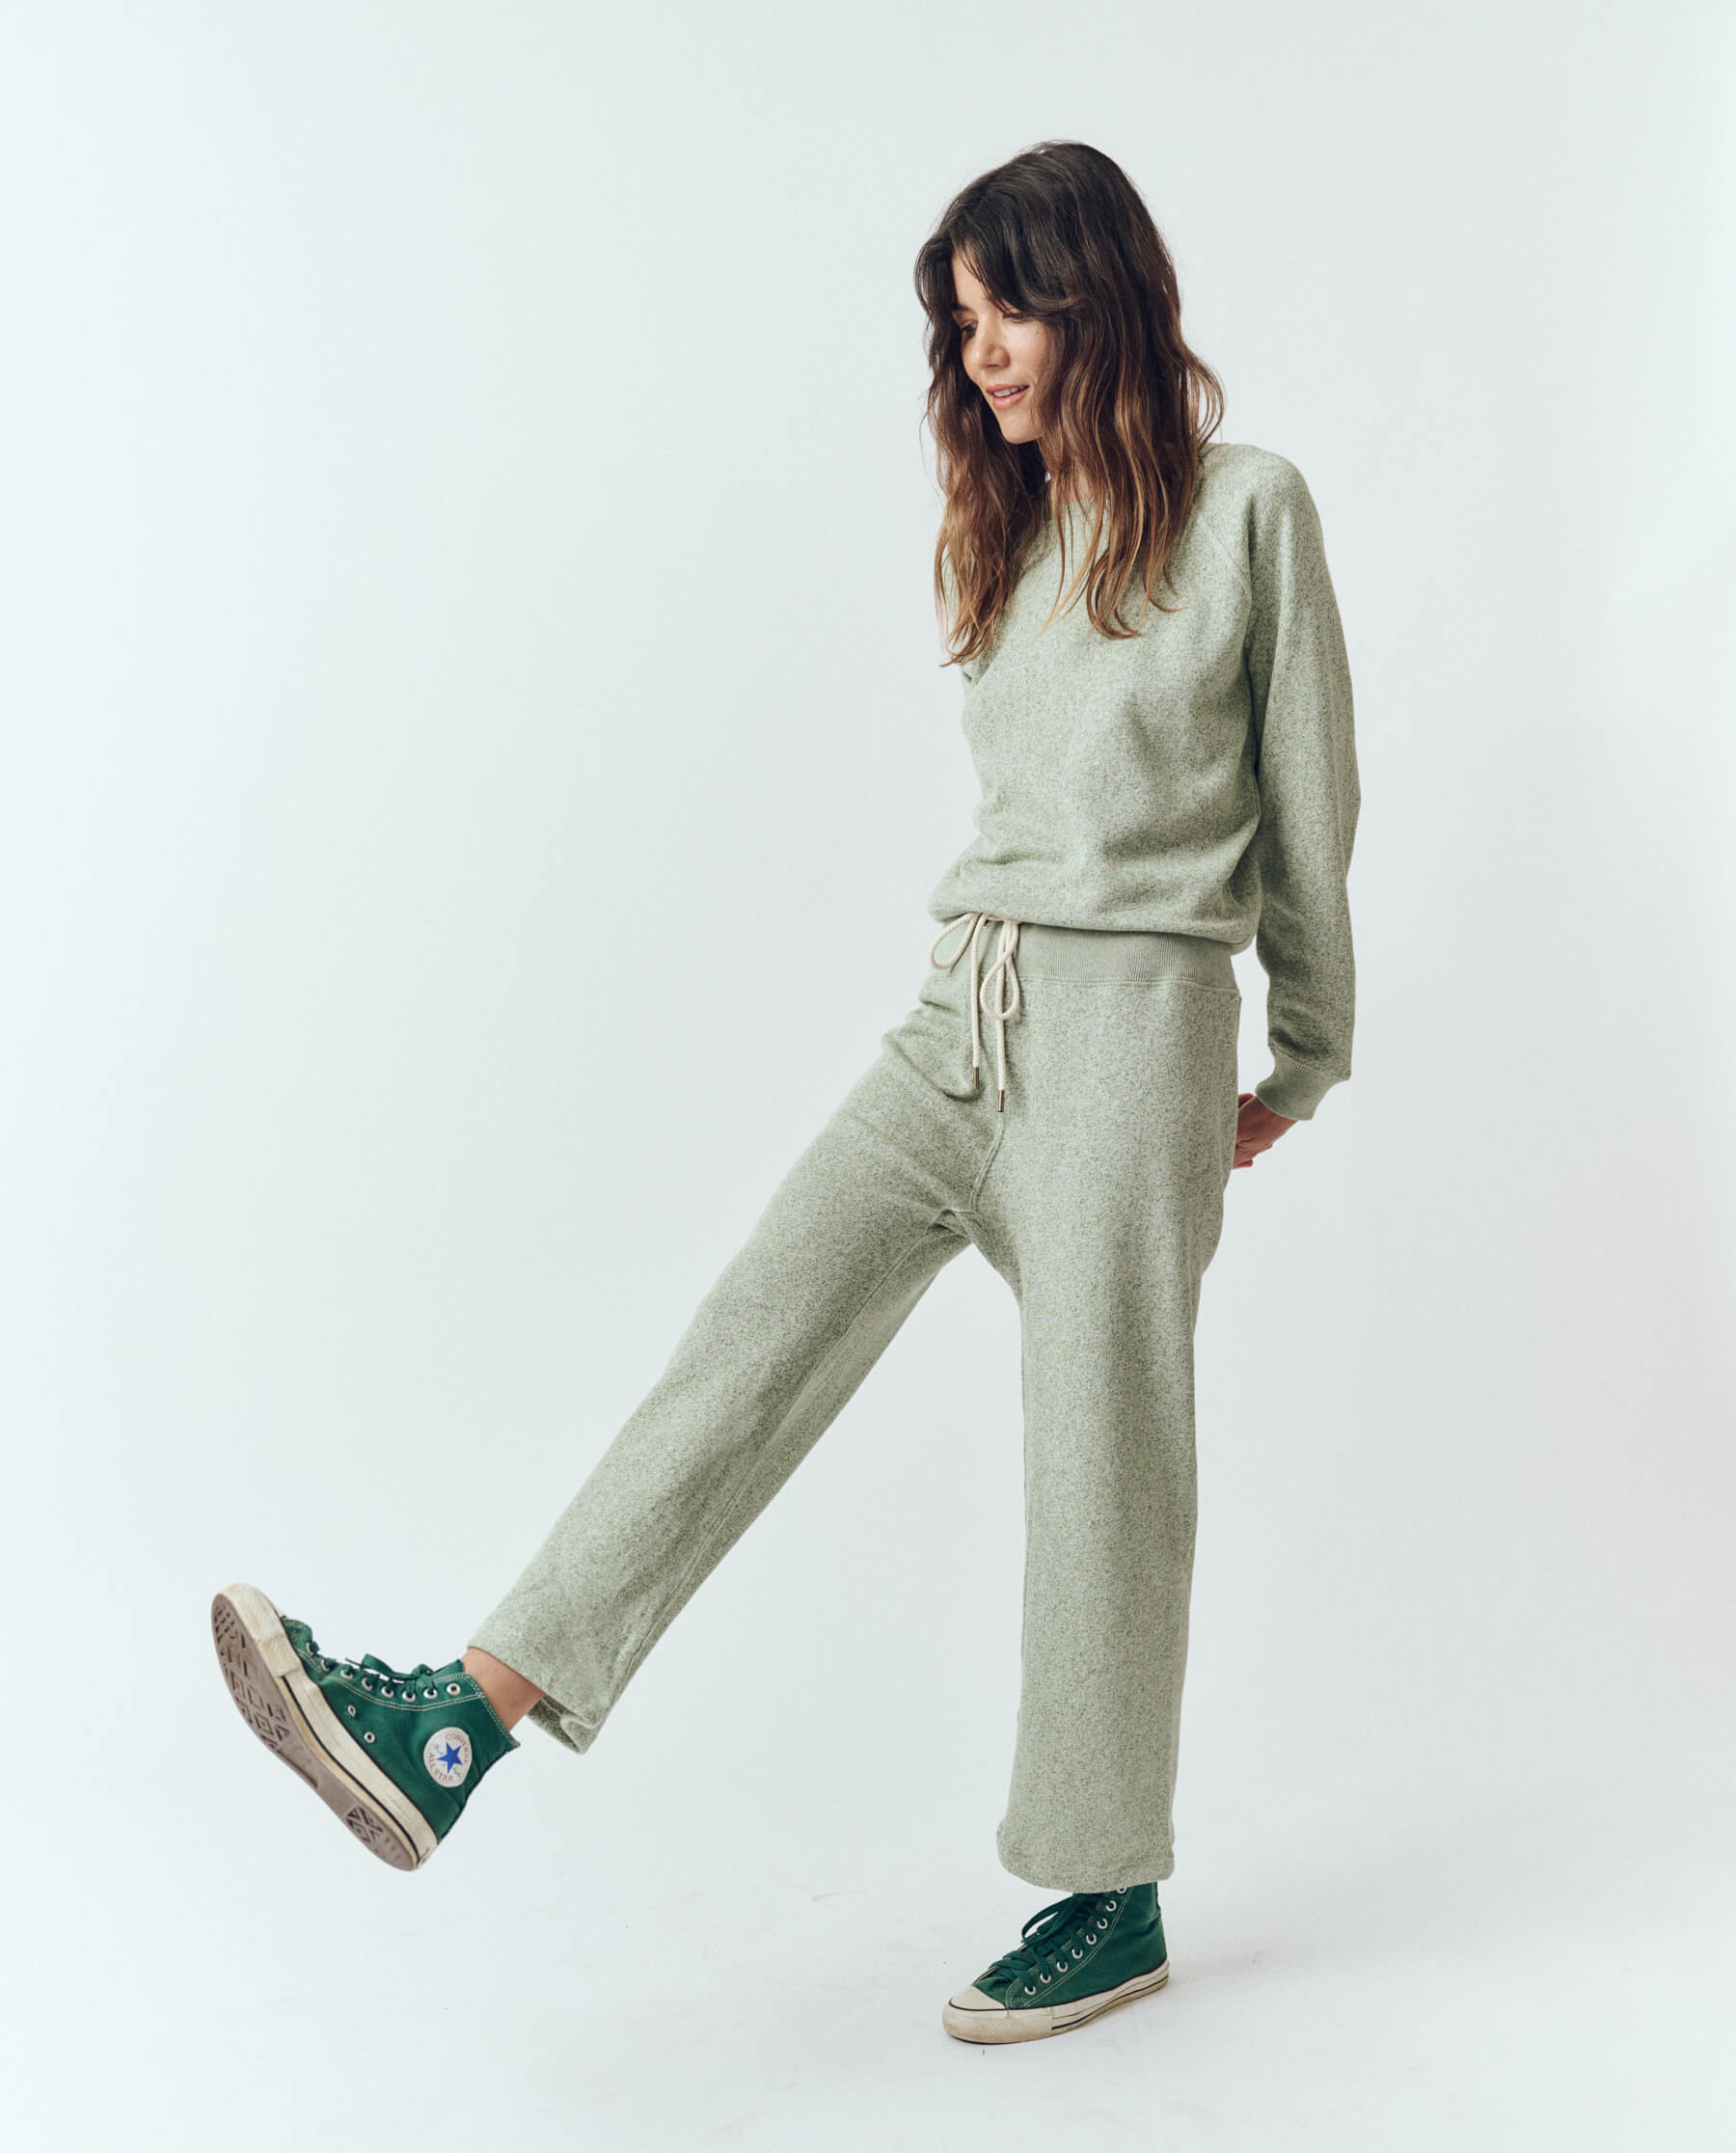 The Relay Sweatpant. -- Heathered Bright Pine SWEATPANTS THE GREAT. SP24 PRESSED CREASE + FLEECE